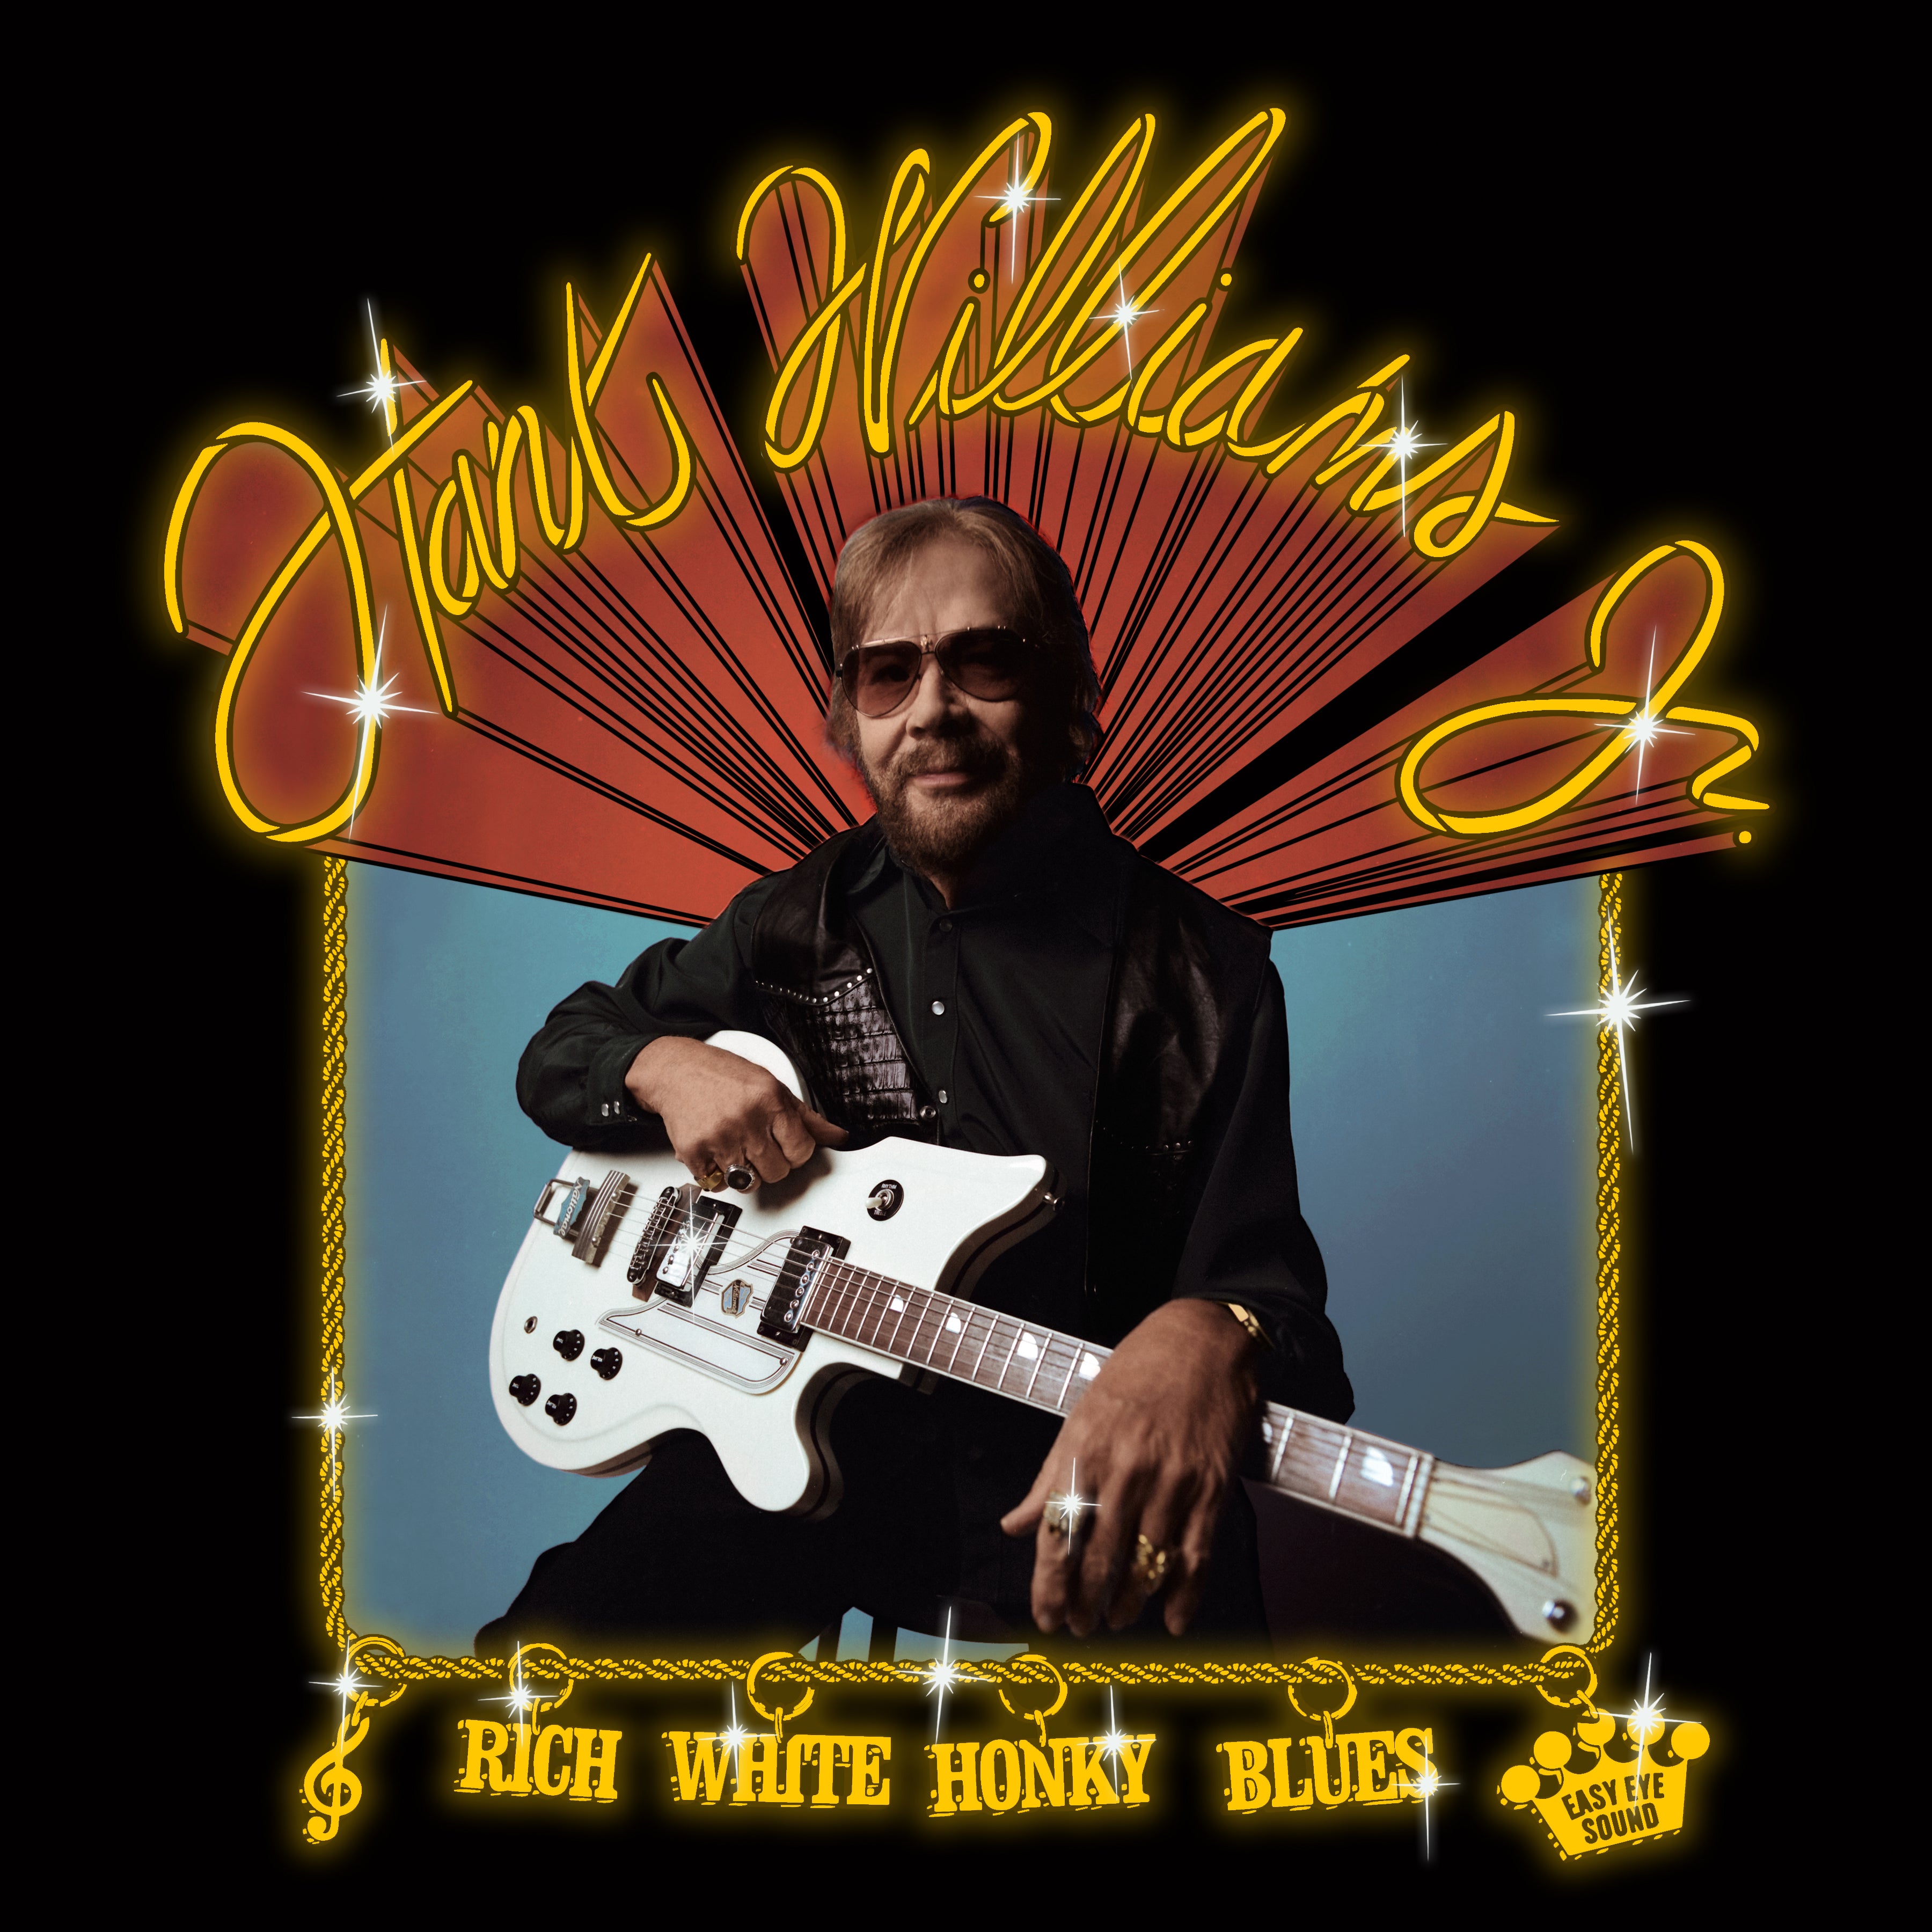 Hank Williams, Jr. lands #1 on Country, Blues & Americana charts with newest album